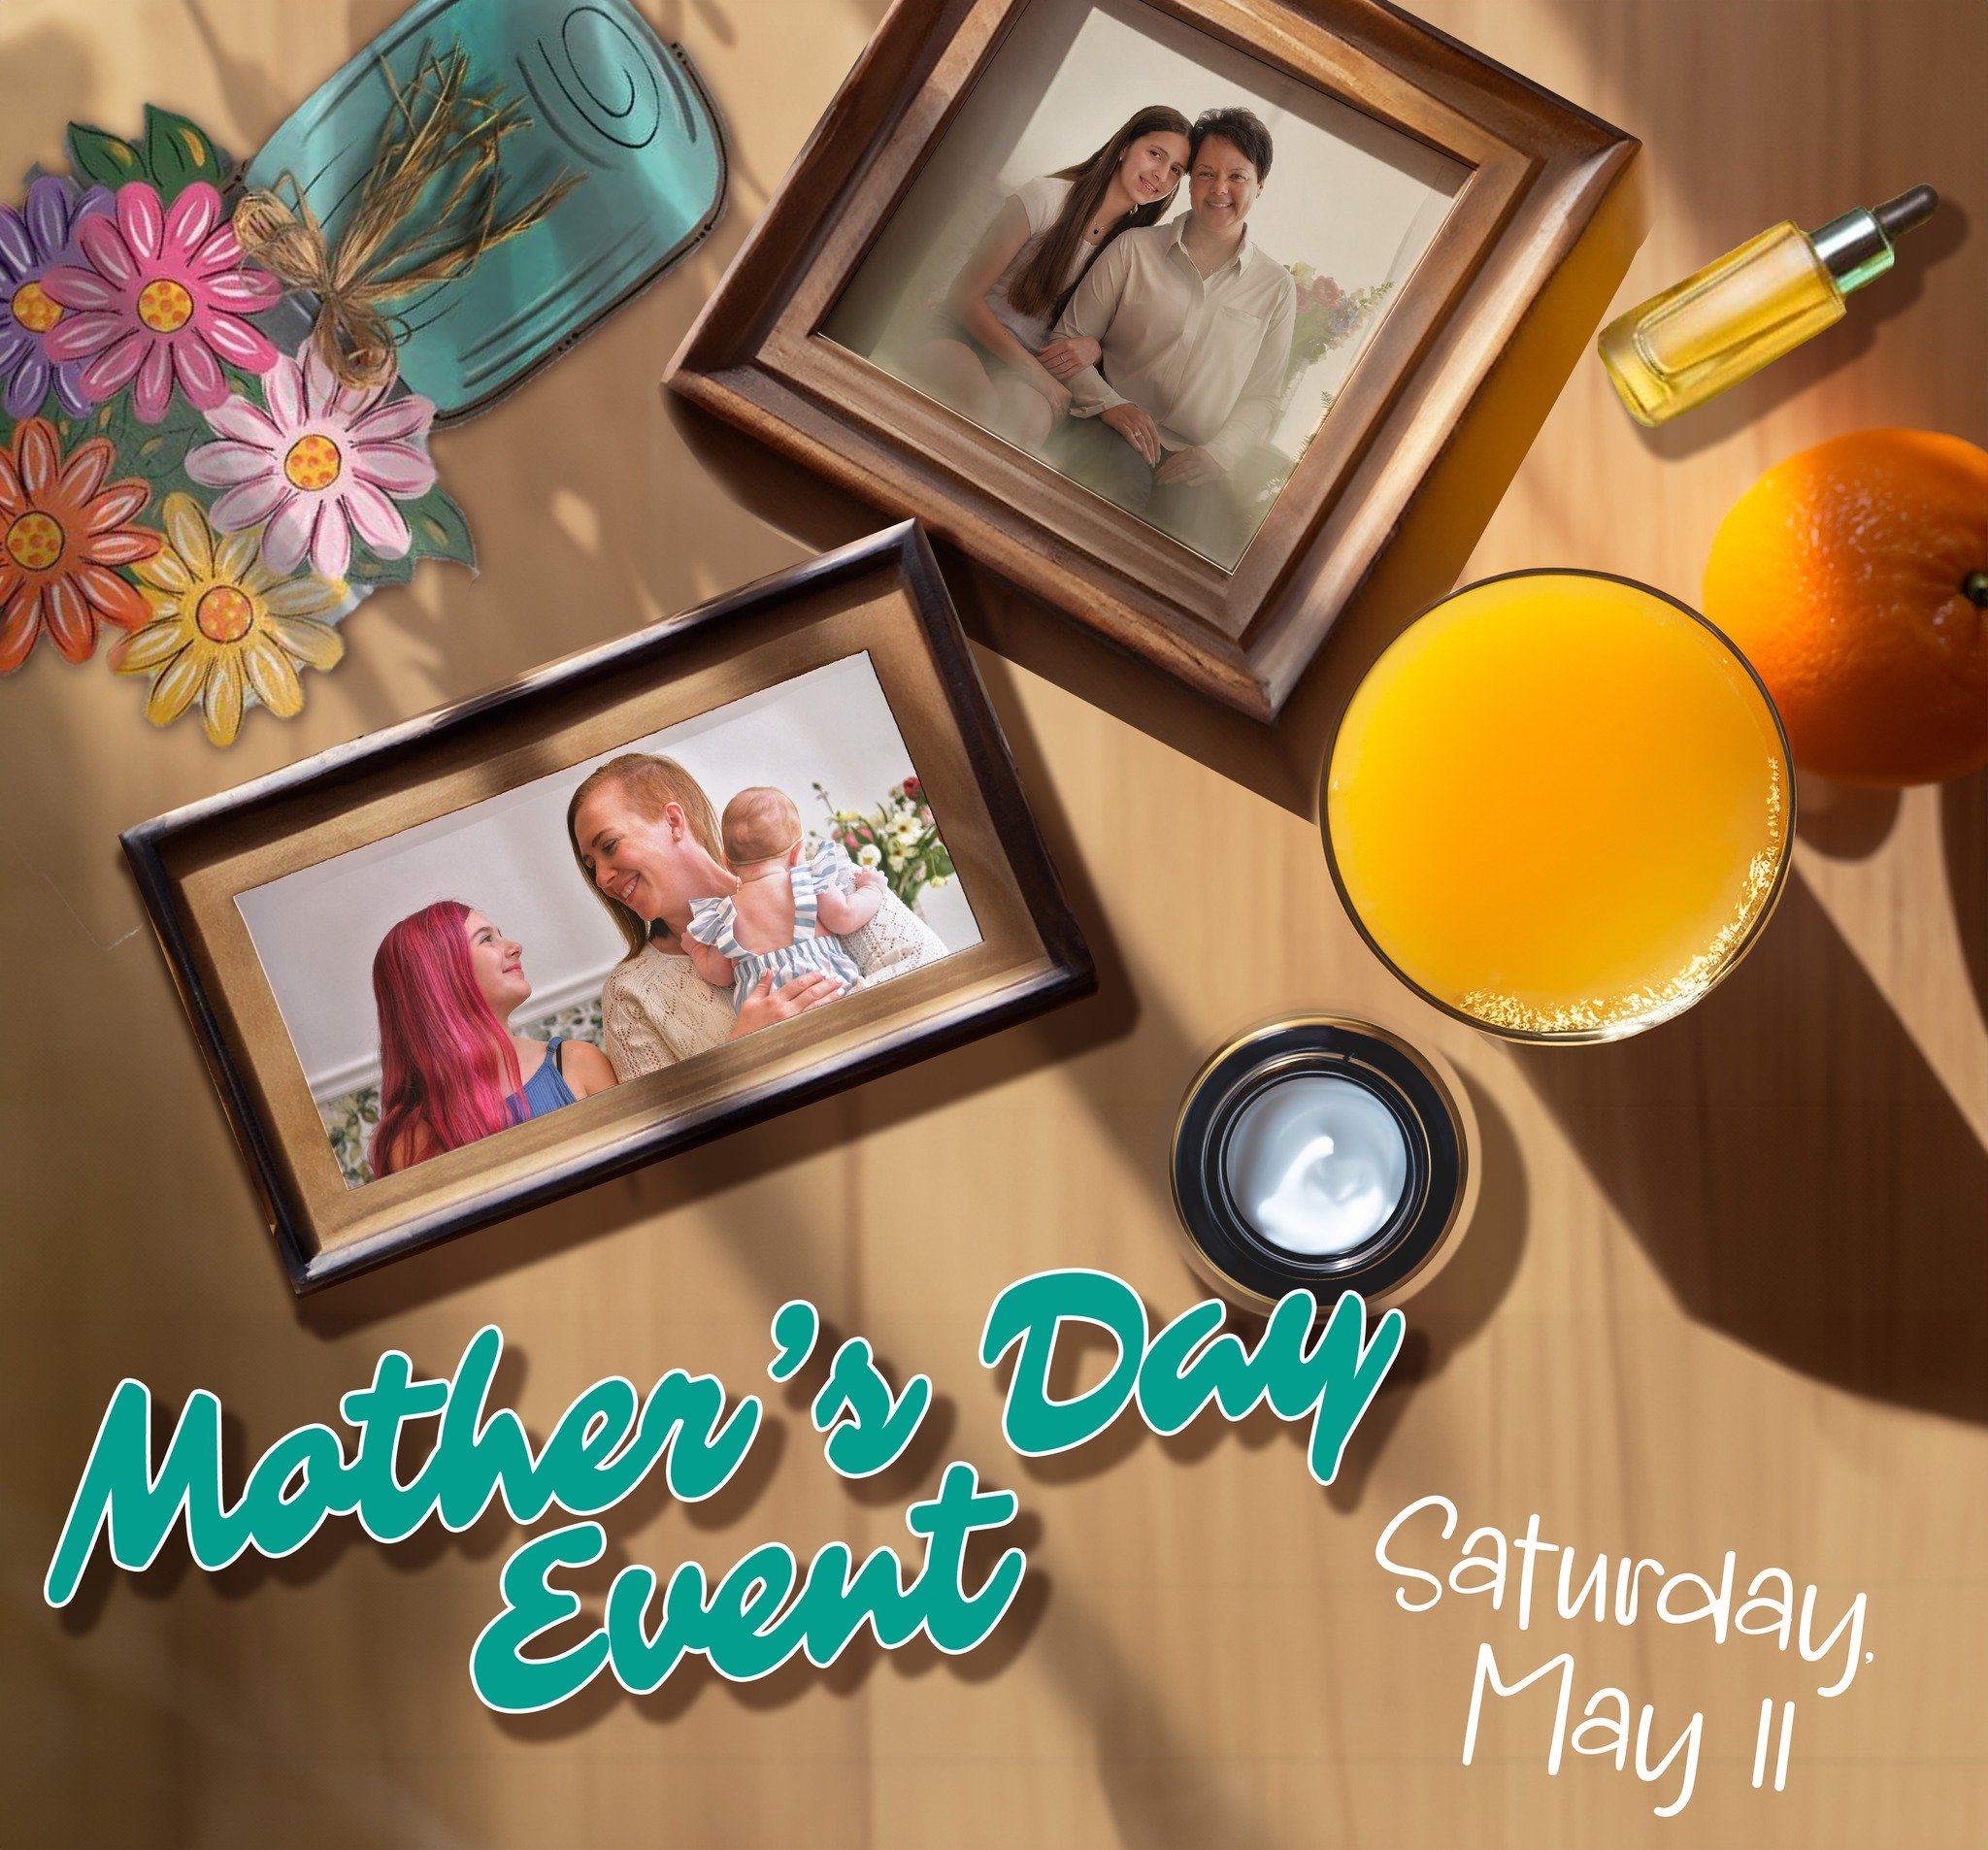 Treat your mama, your daughter, your bestie or yourself! Last week to guarantee your spot for our Mother's Day pampering on Saturday May 11. Join myself along with Skin Sanctuary Boutique Spa,  Crafty Spirits, Magic Mama Trio and myself at the studio